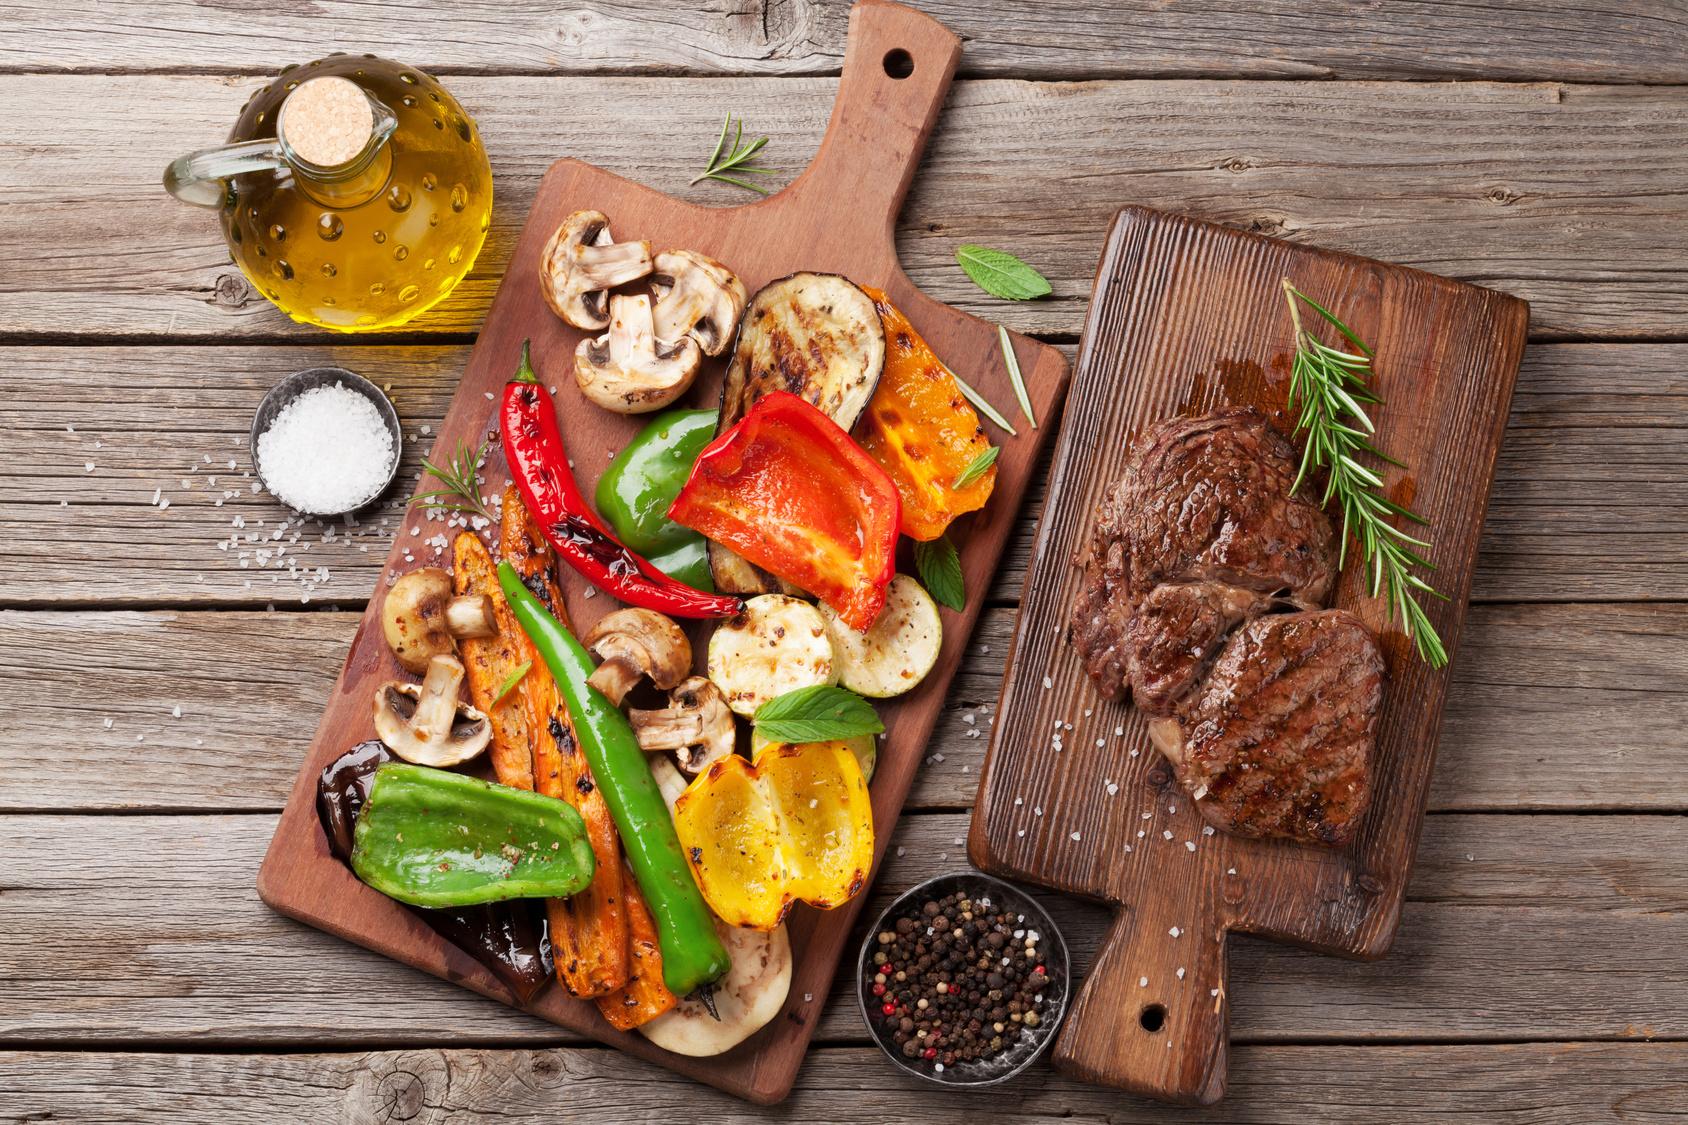 Grilled vegetables and beef steak on cutting board on wooden table. Top view